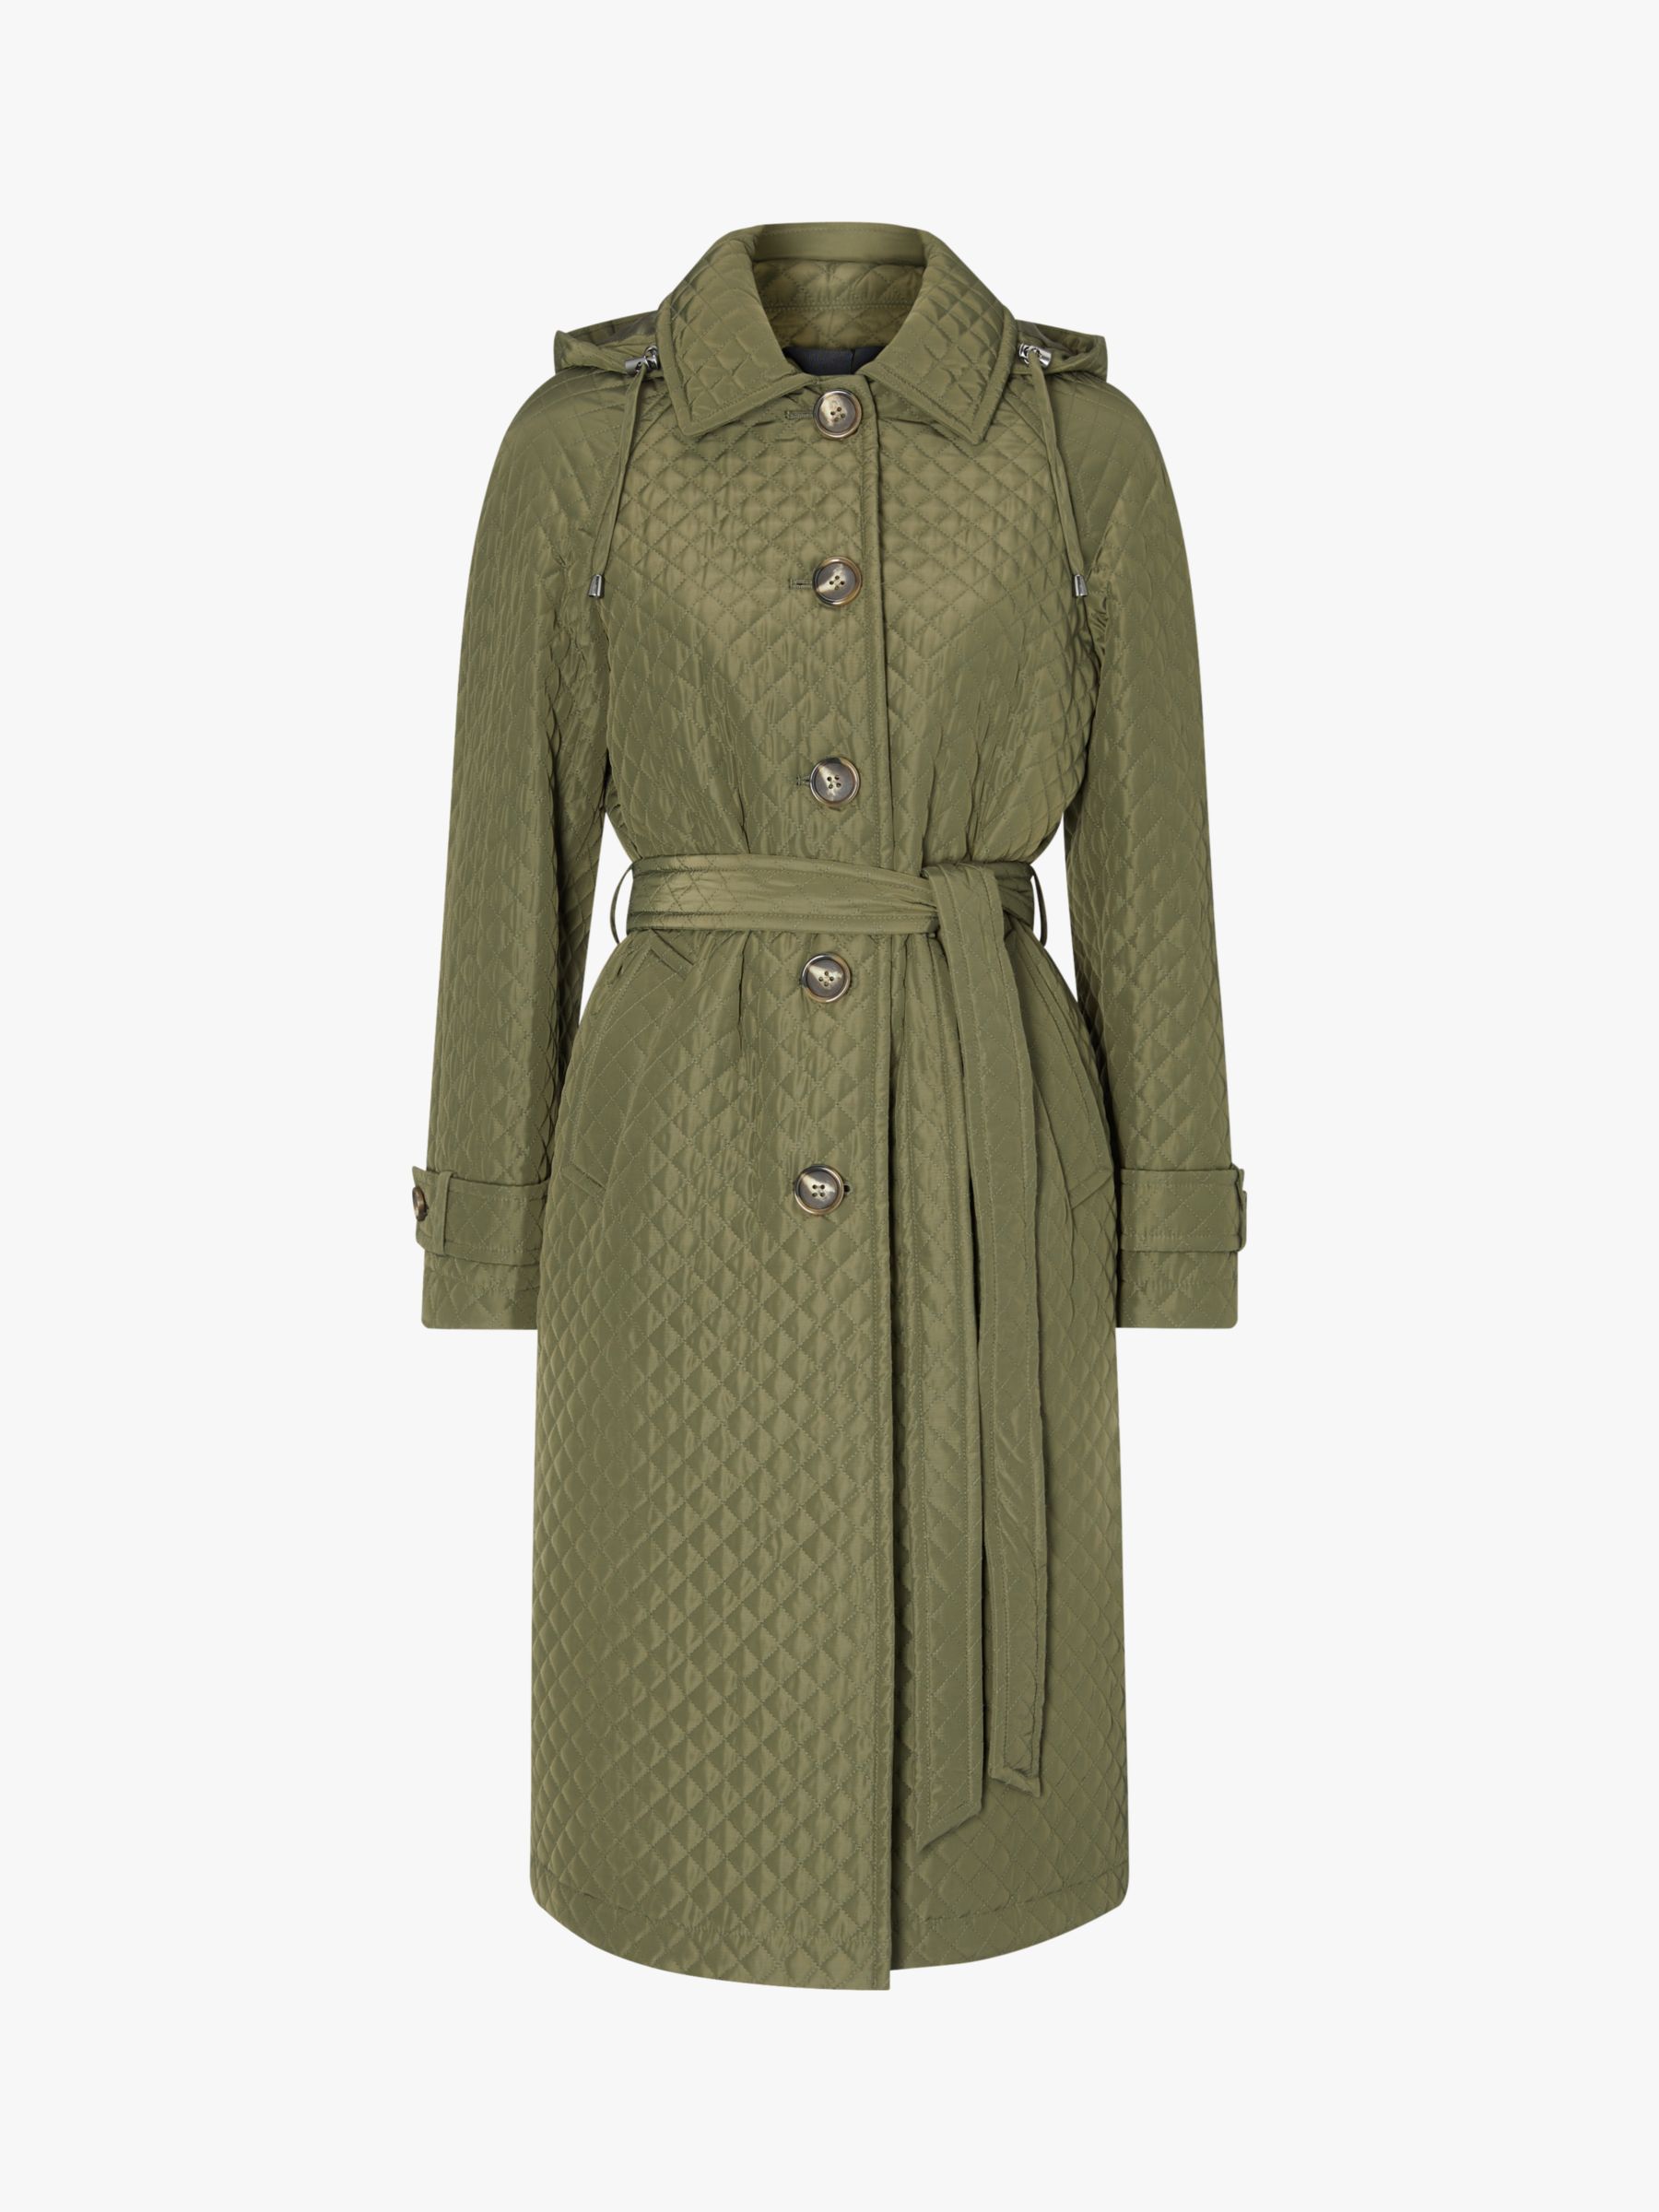 Buy Four Seasons Quilted Trench Coat Online at johnlewis.com